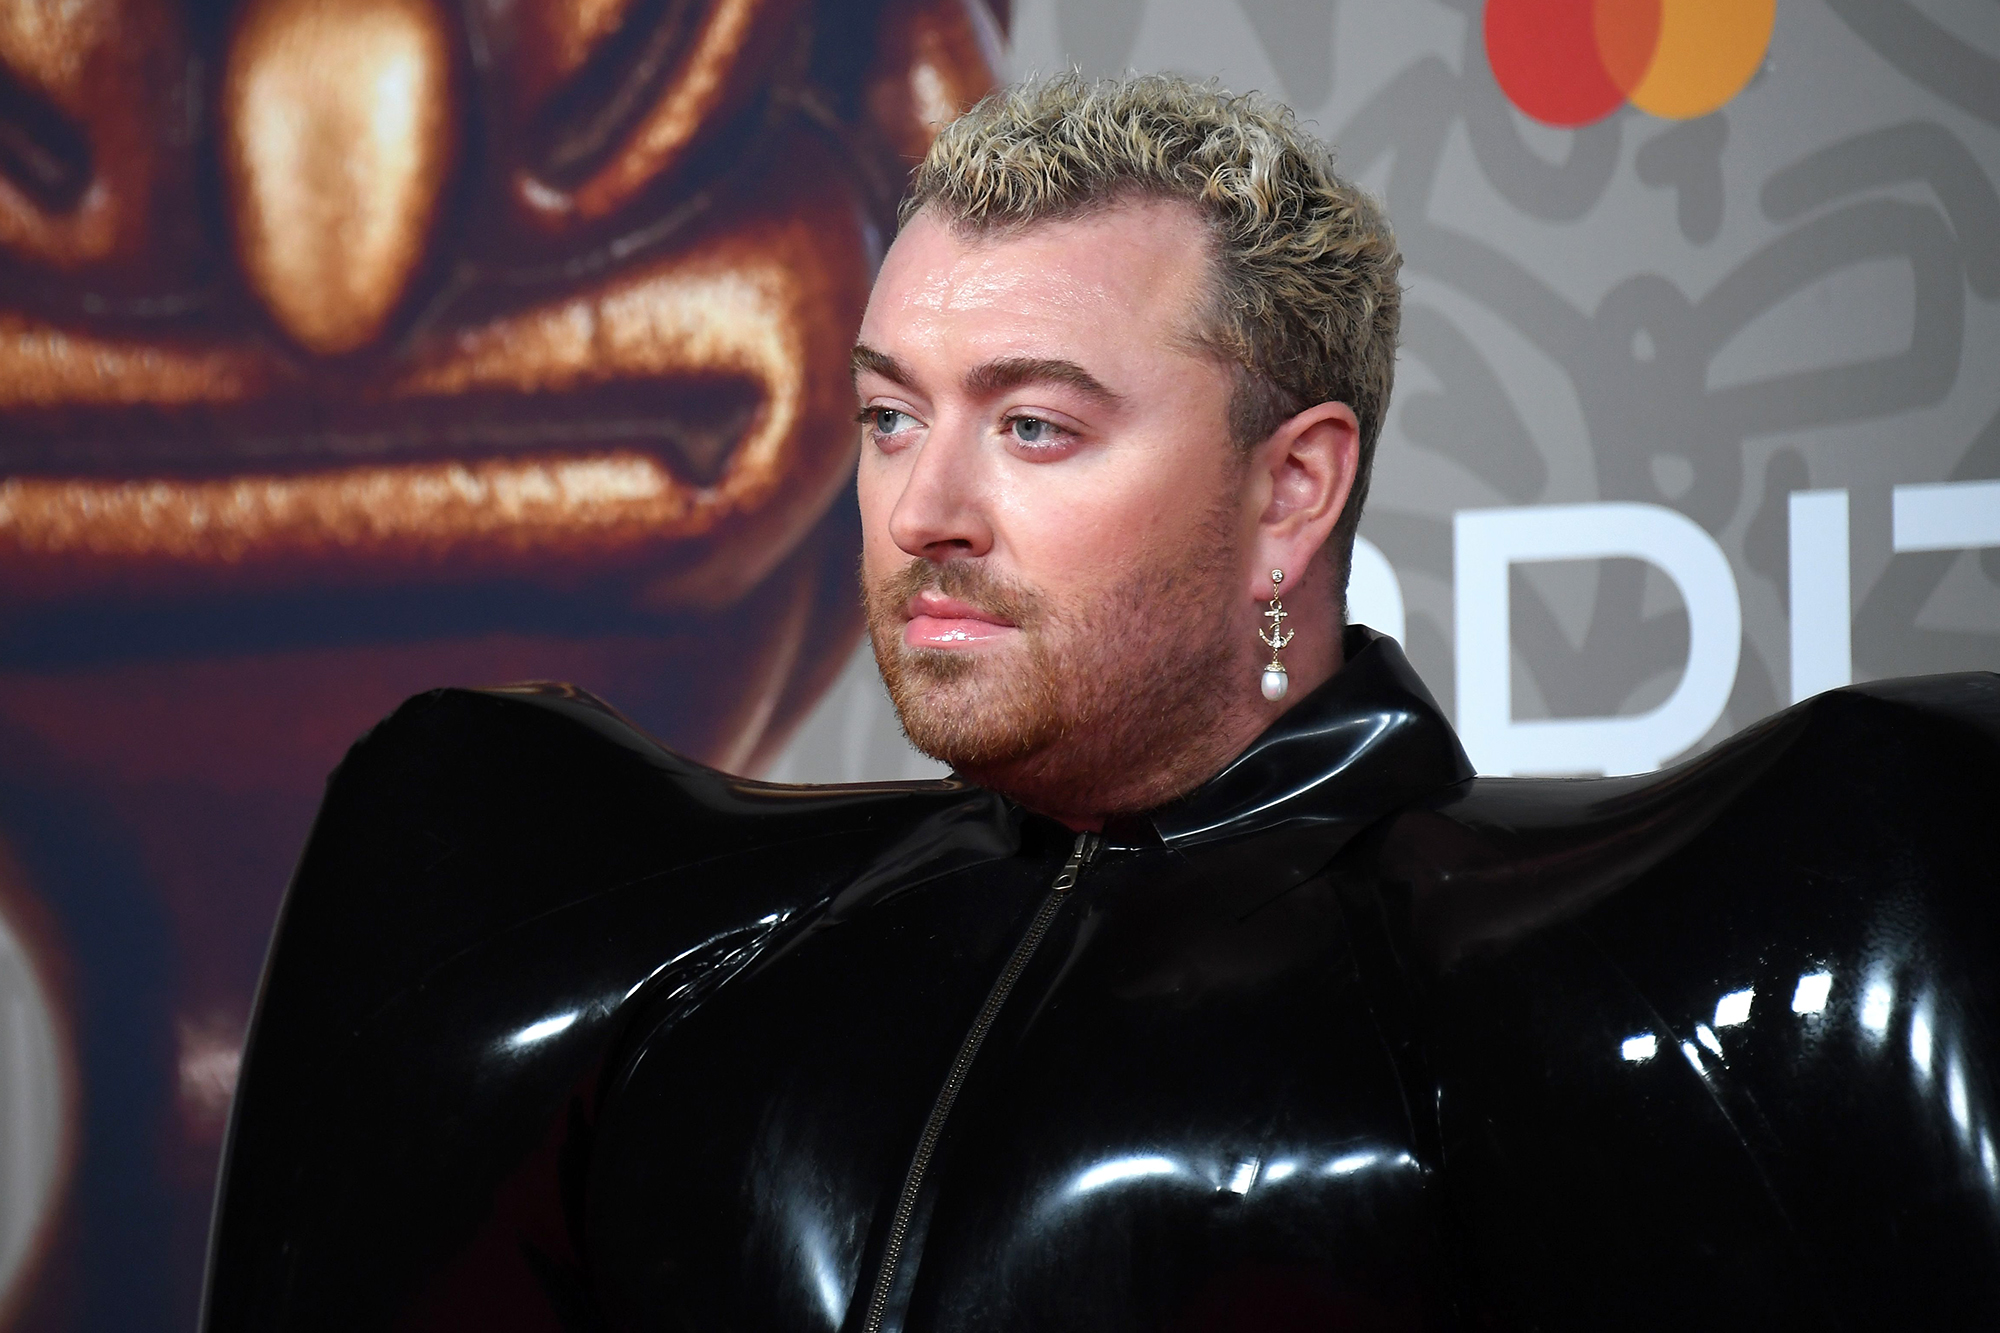 Look of the Week: Sam Smith's inflatable latex jumpsuit at the Brit Awards